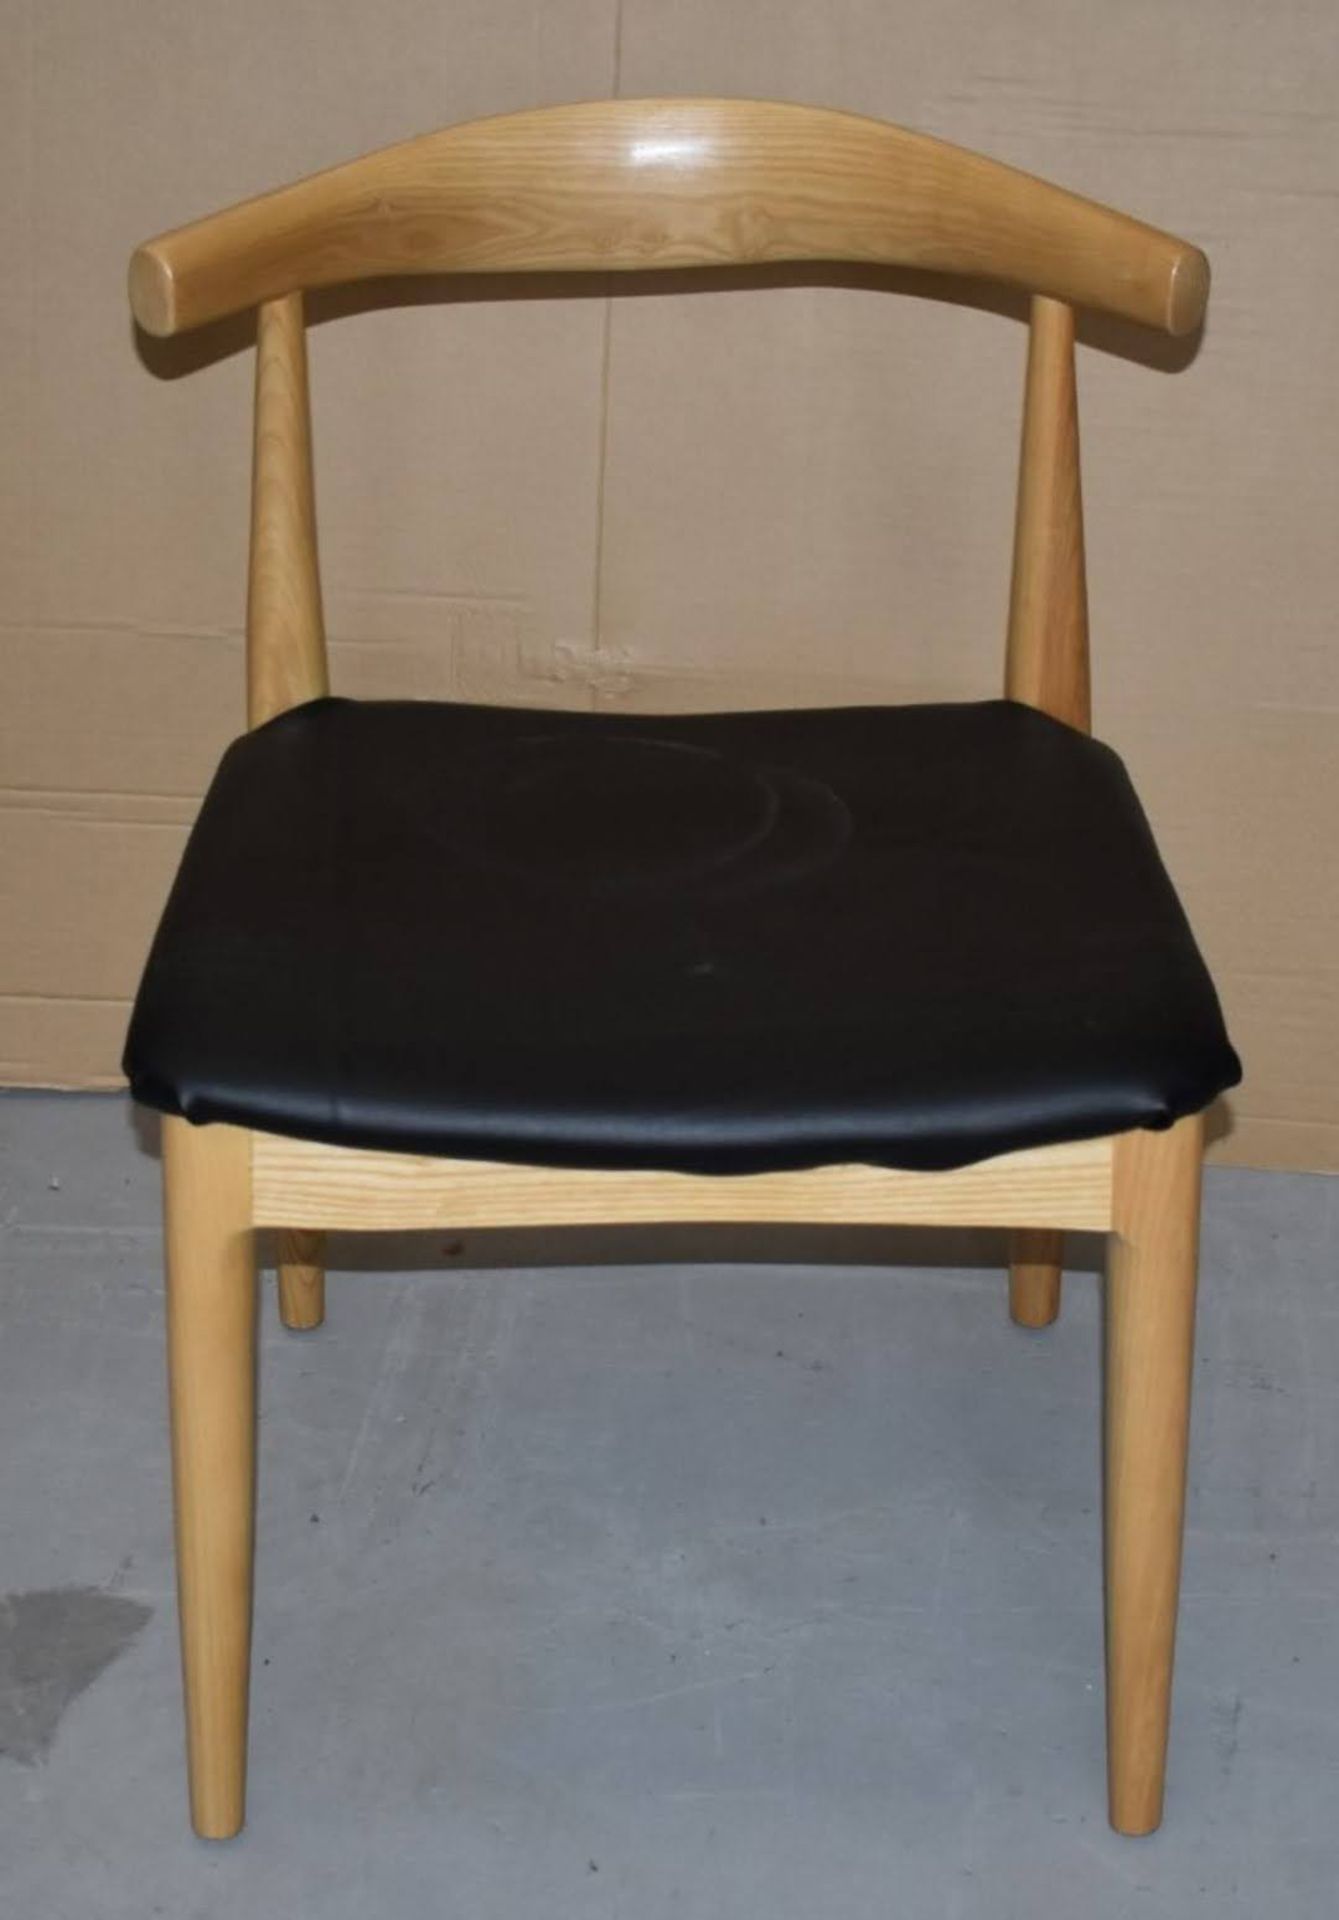 1 x Hans Wegner Inspired Elbow Chair - Solid Wood Chair With Light Stain Finish and Black Seat Pad - - Image 2 of 9